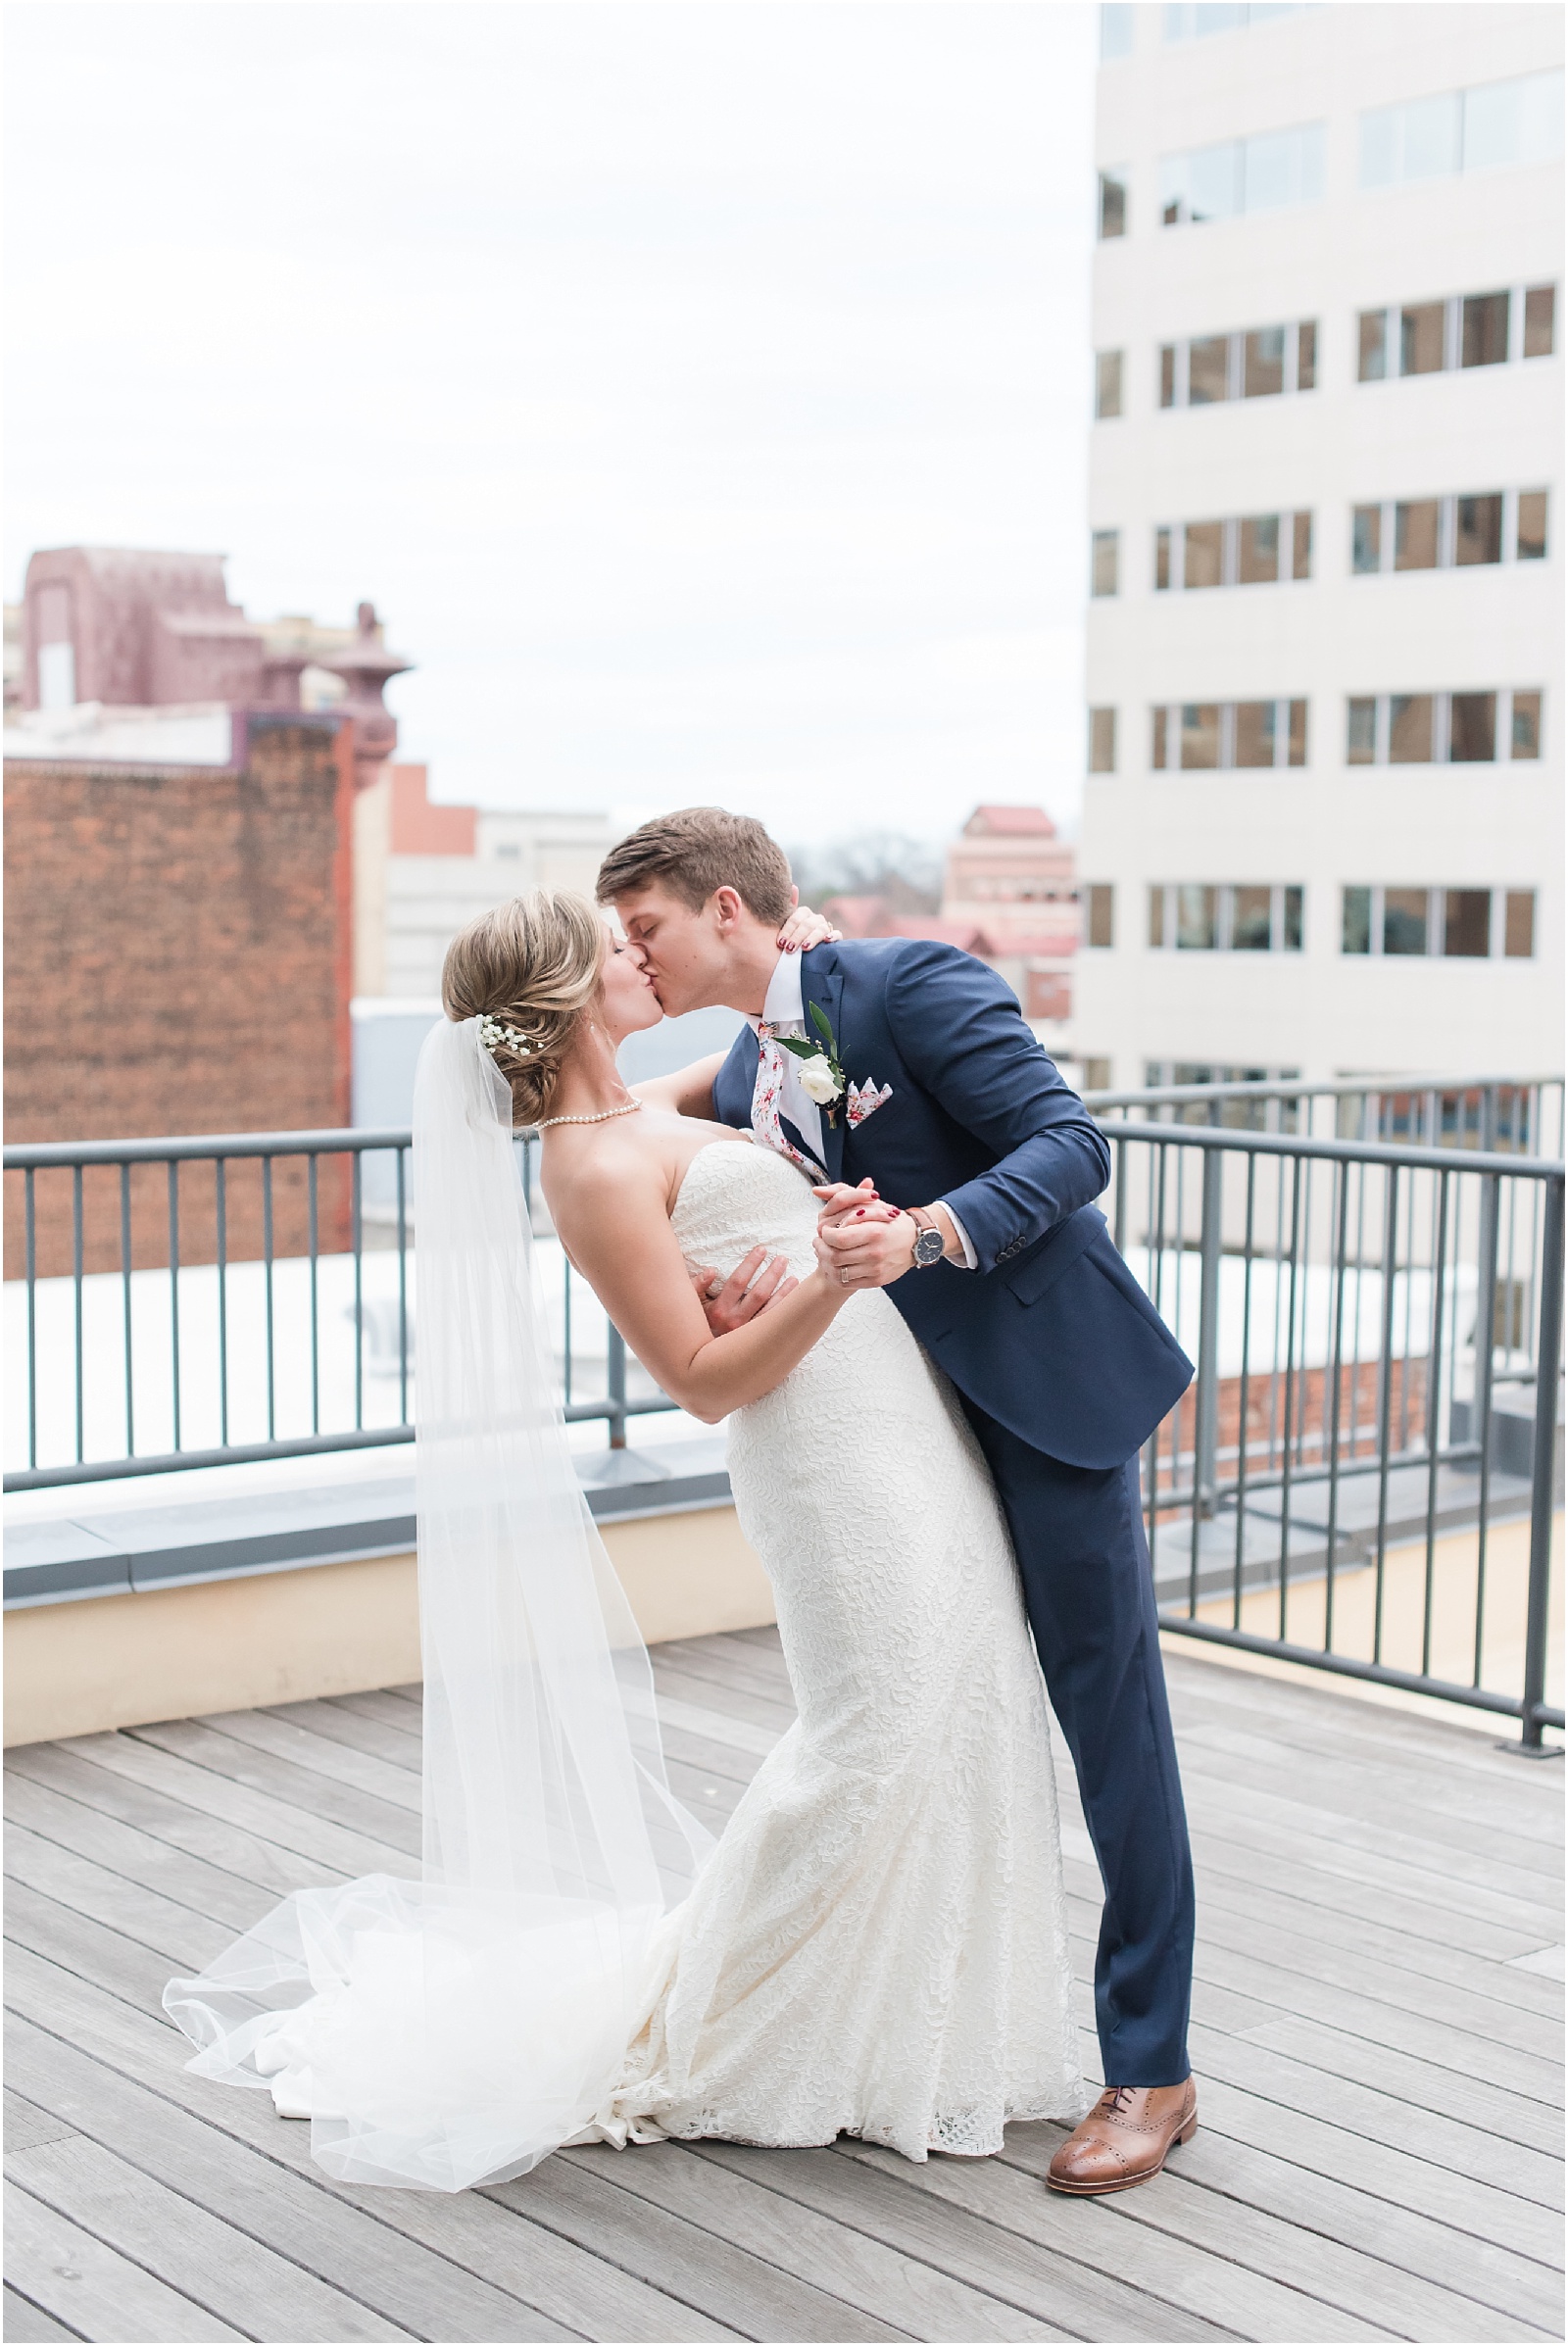 Bride and groom in a dip kiss on rooftop patio with a view of downtown Raleigh at the glass box